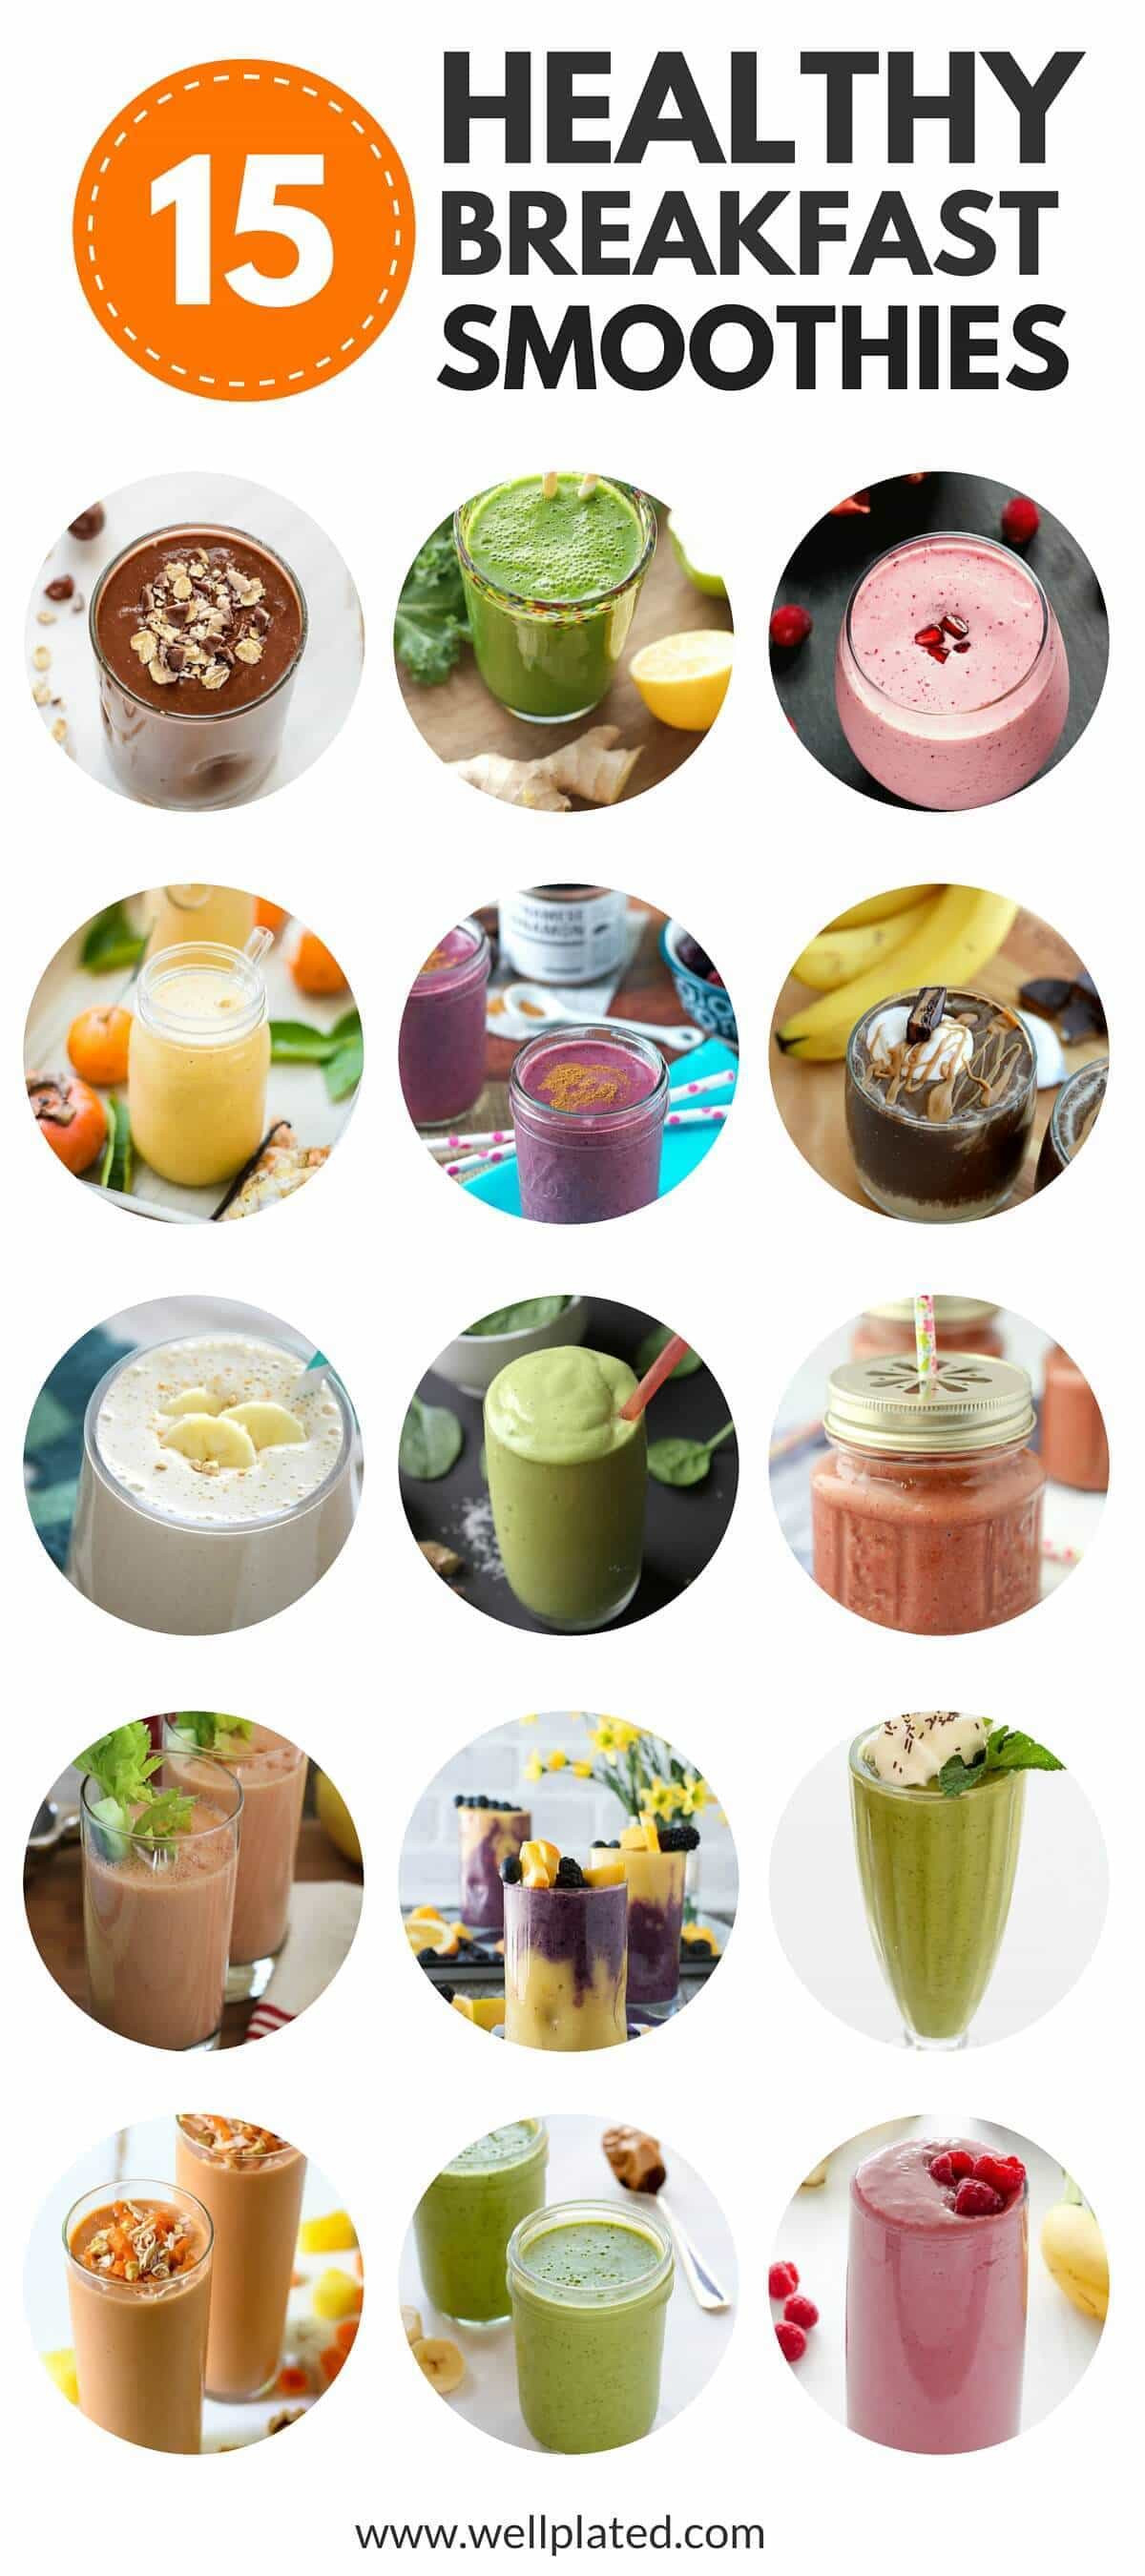 Healthy Breakfast For Weight Loss
 The Best 15 Healthy Breakfast Smoothies